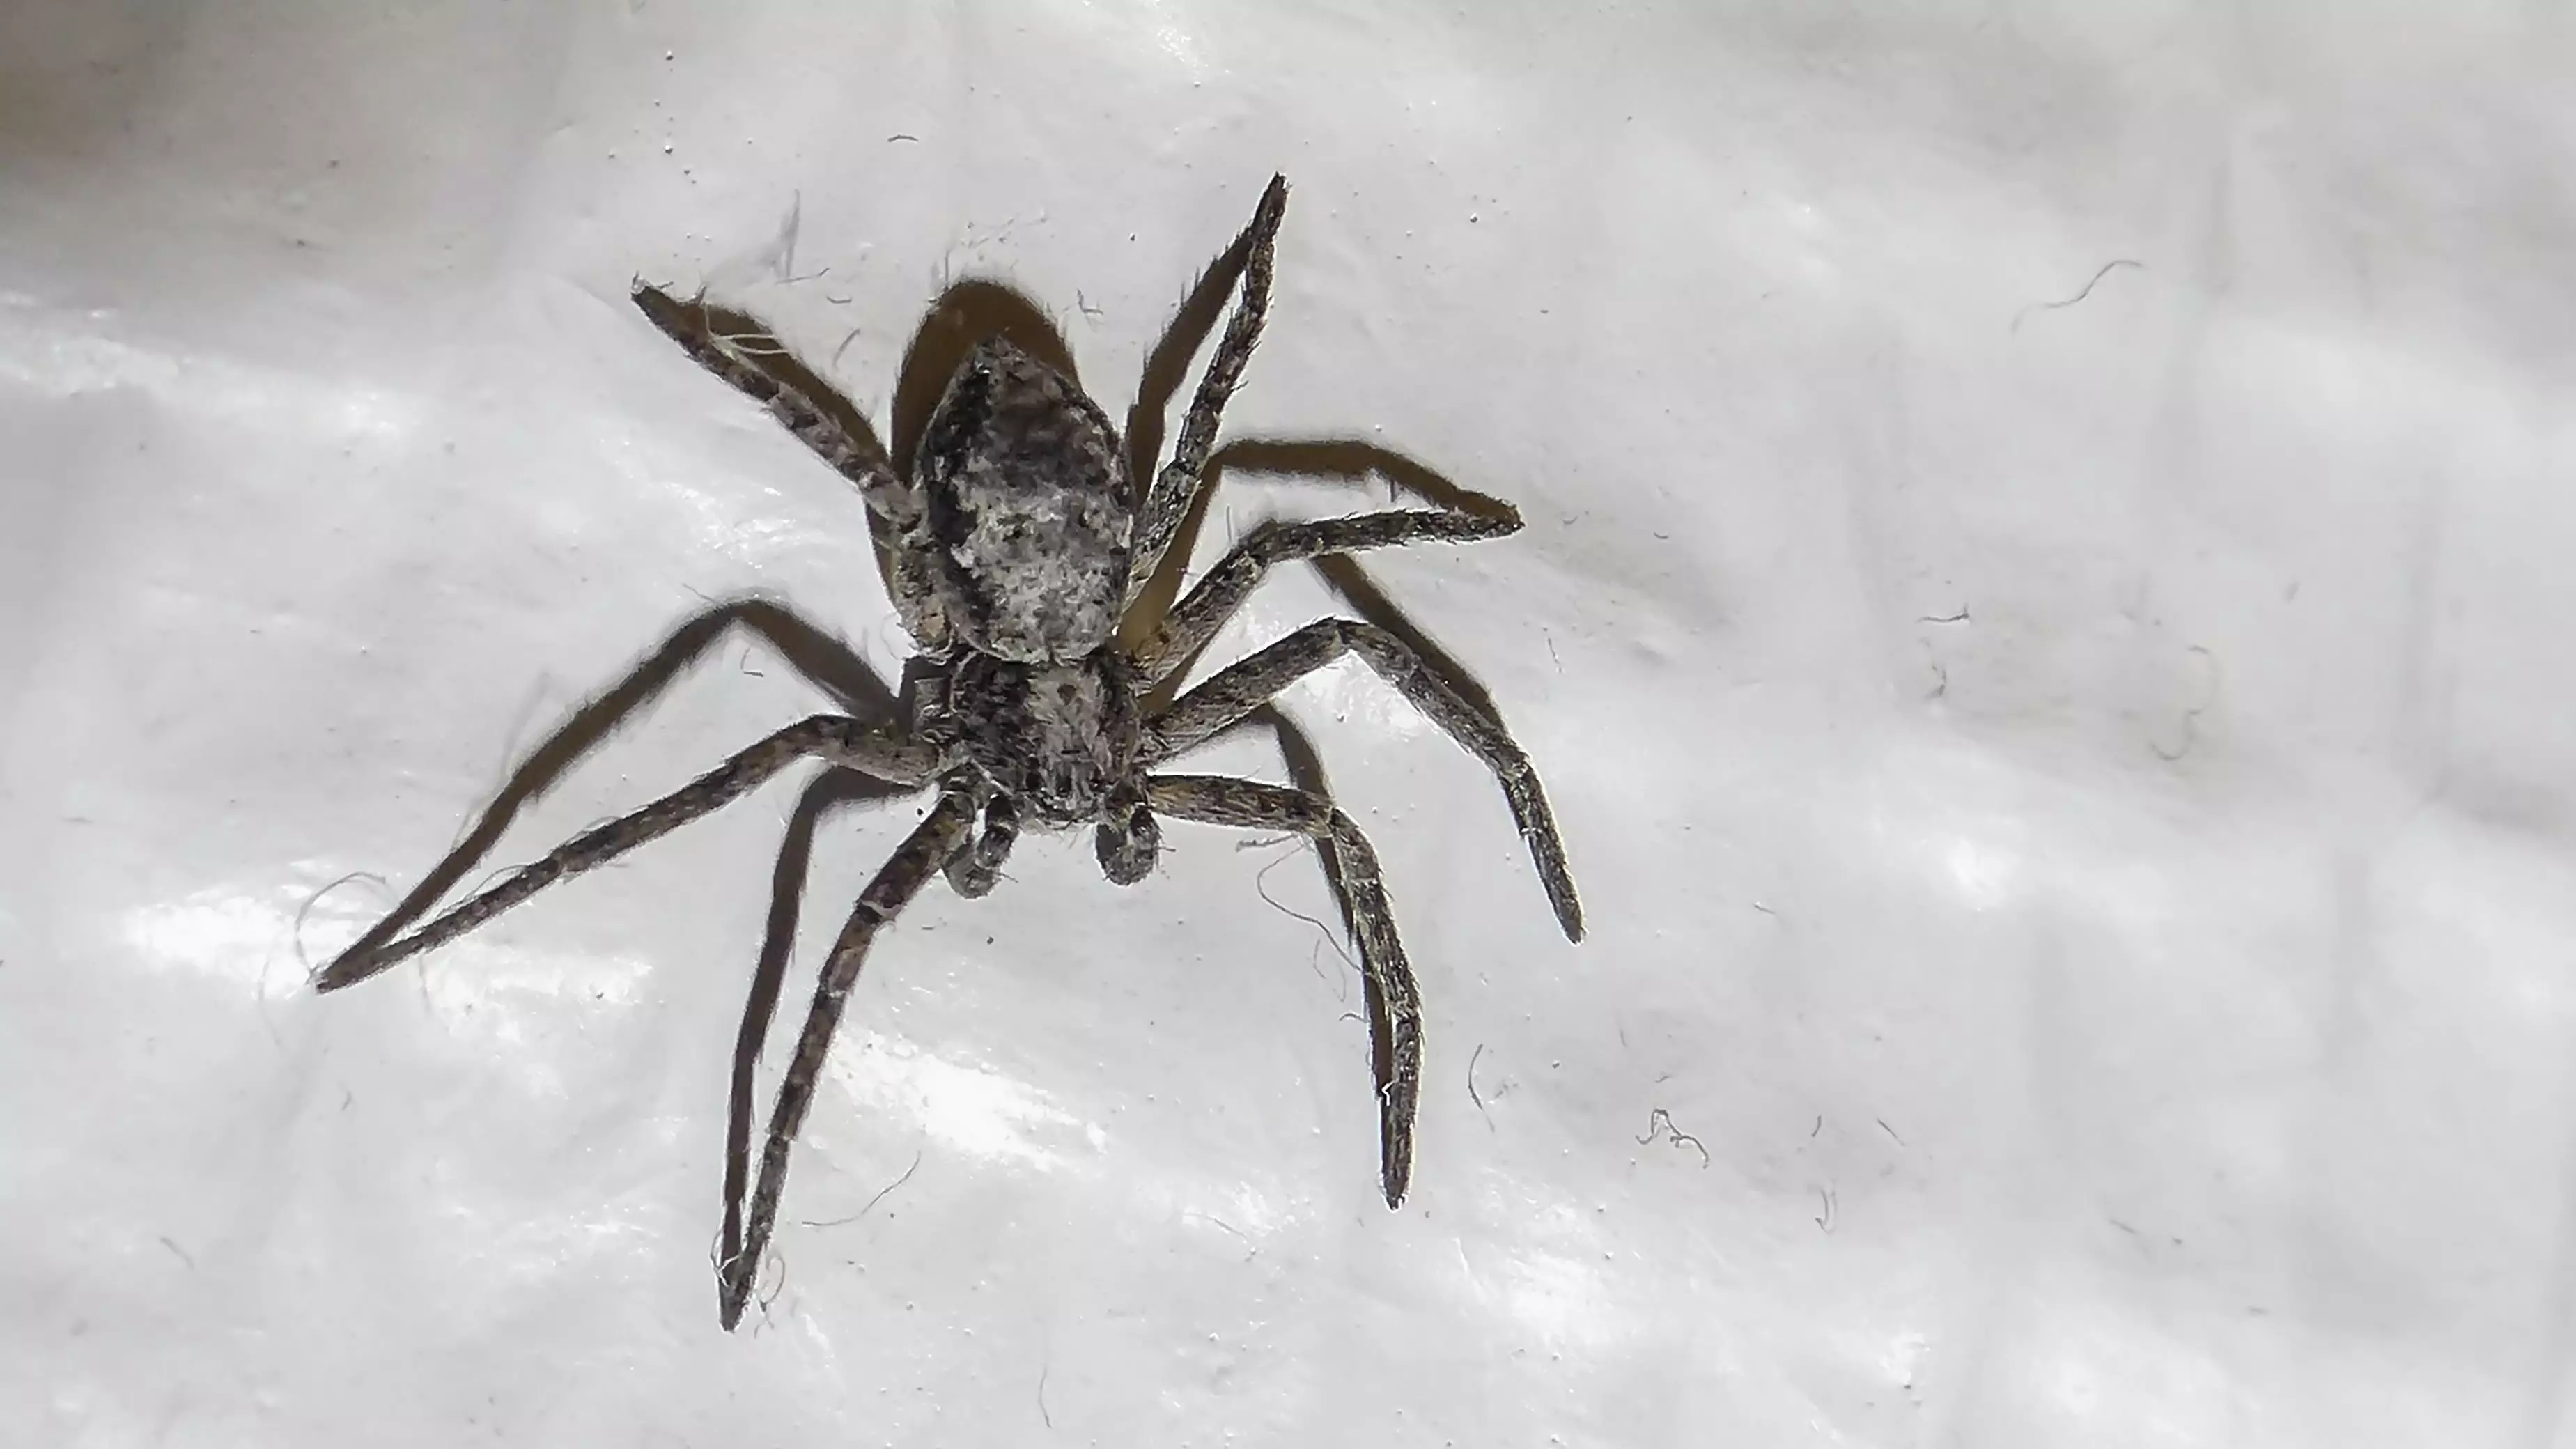 Species Of Spider That Can Jump Six Feet Discovered In UK